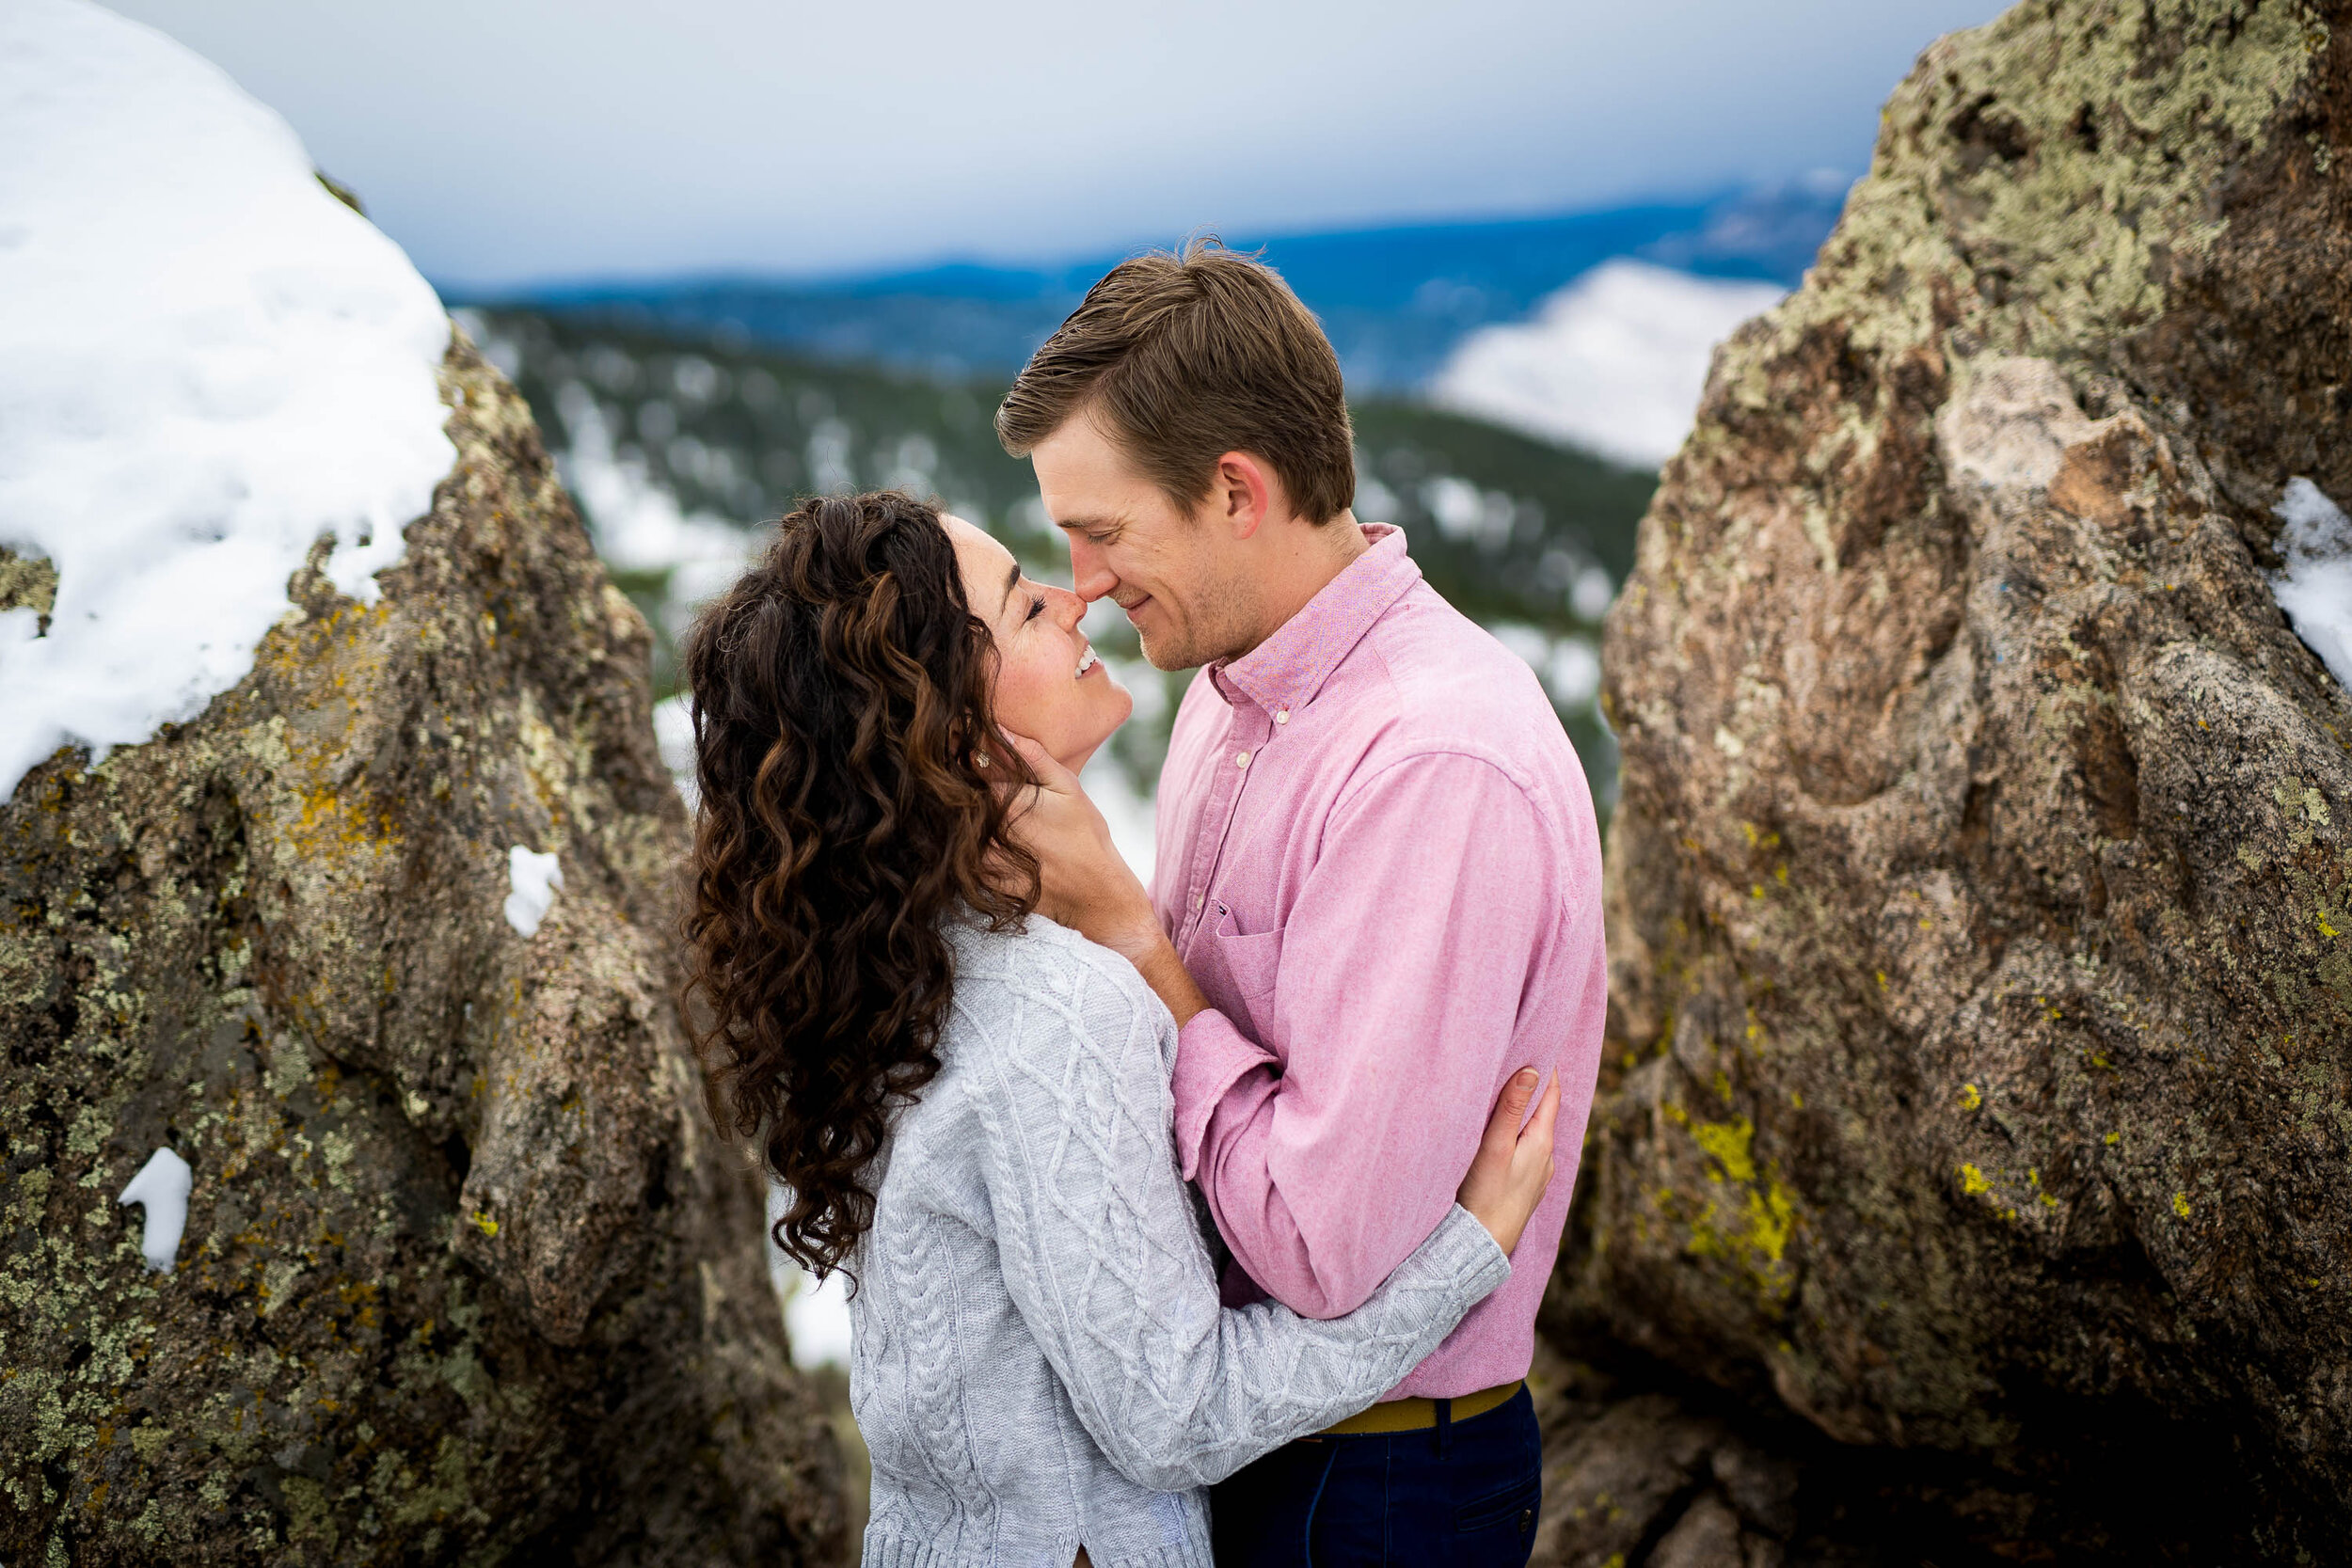 Engaged couple poses for portraits on a rocky ledge overlooking the snow-capped Rocky Mountains in the distance, Engagement Session, Engagement Photos, Engagement Photos Inspiration, Engagement Photography, Engagement Photographer, Winter Engagement Photos, Mountain Engagement Photos, Lost Gulch Overlook engagement session, Lost Gulch Overlook engagement photos, Lost Gulch Overlook engagement photography, Lost Gulch Overlook engagement photographer, Lost Gulch Overlook  engagement inspiration, Boulder engagement session, Boulder engagement photos, Boulder engagement photography, Boulder engagement photographer, Boulder engagement inspiration, Colorado engagement session, Colorado engagement photos, Colorado engagement photography, Colorado engagement photographer, Colorado engagement inspiration